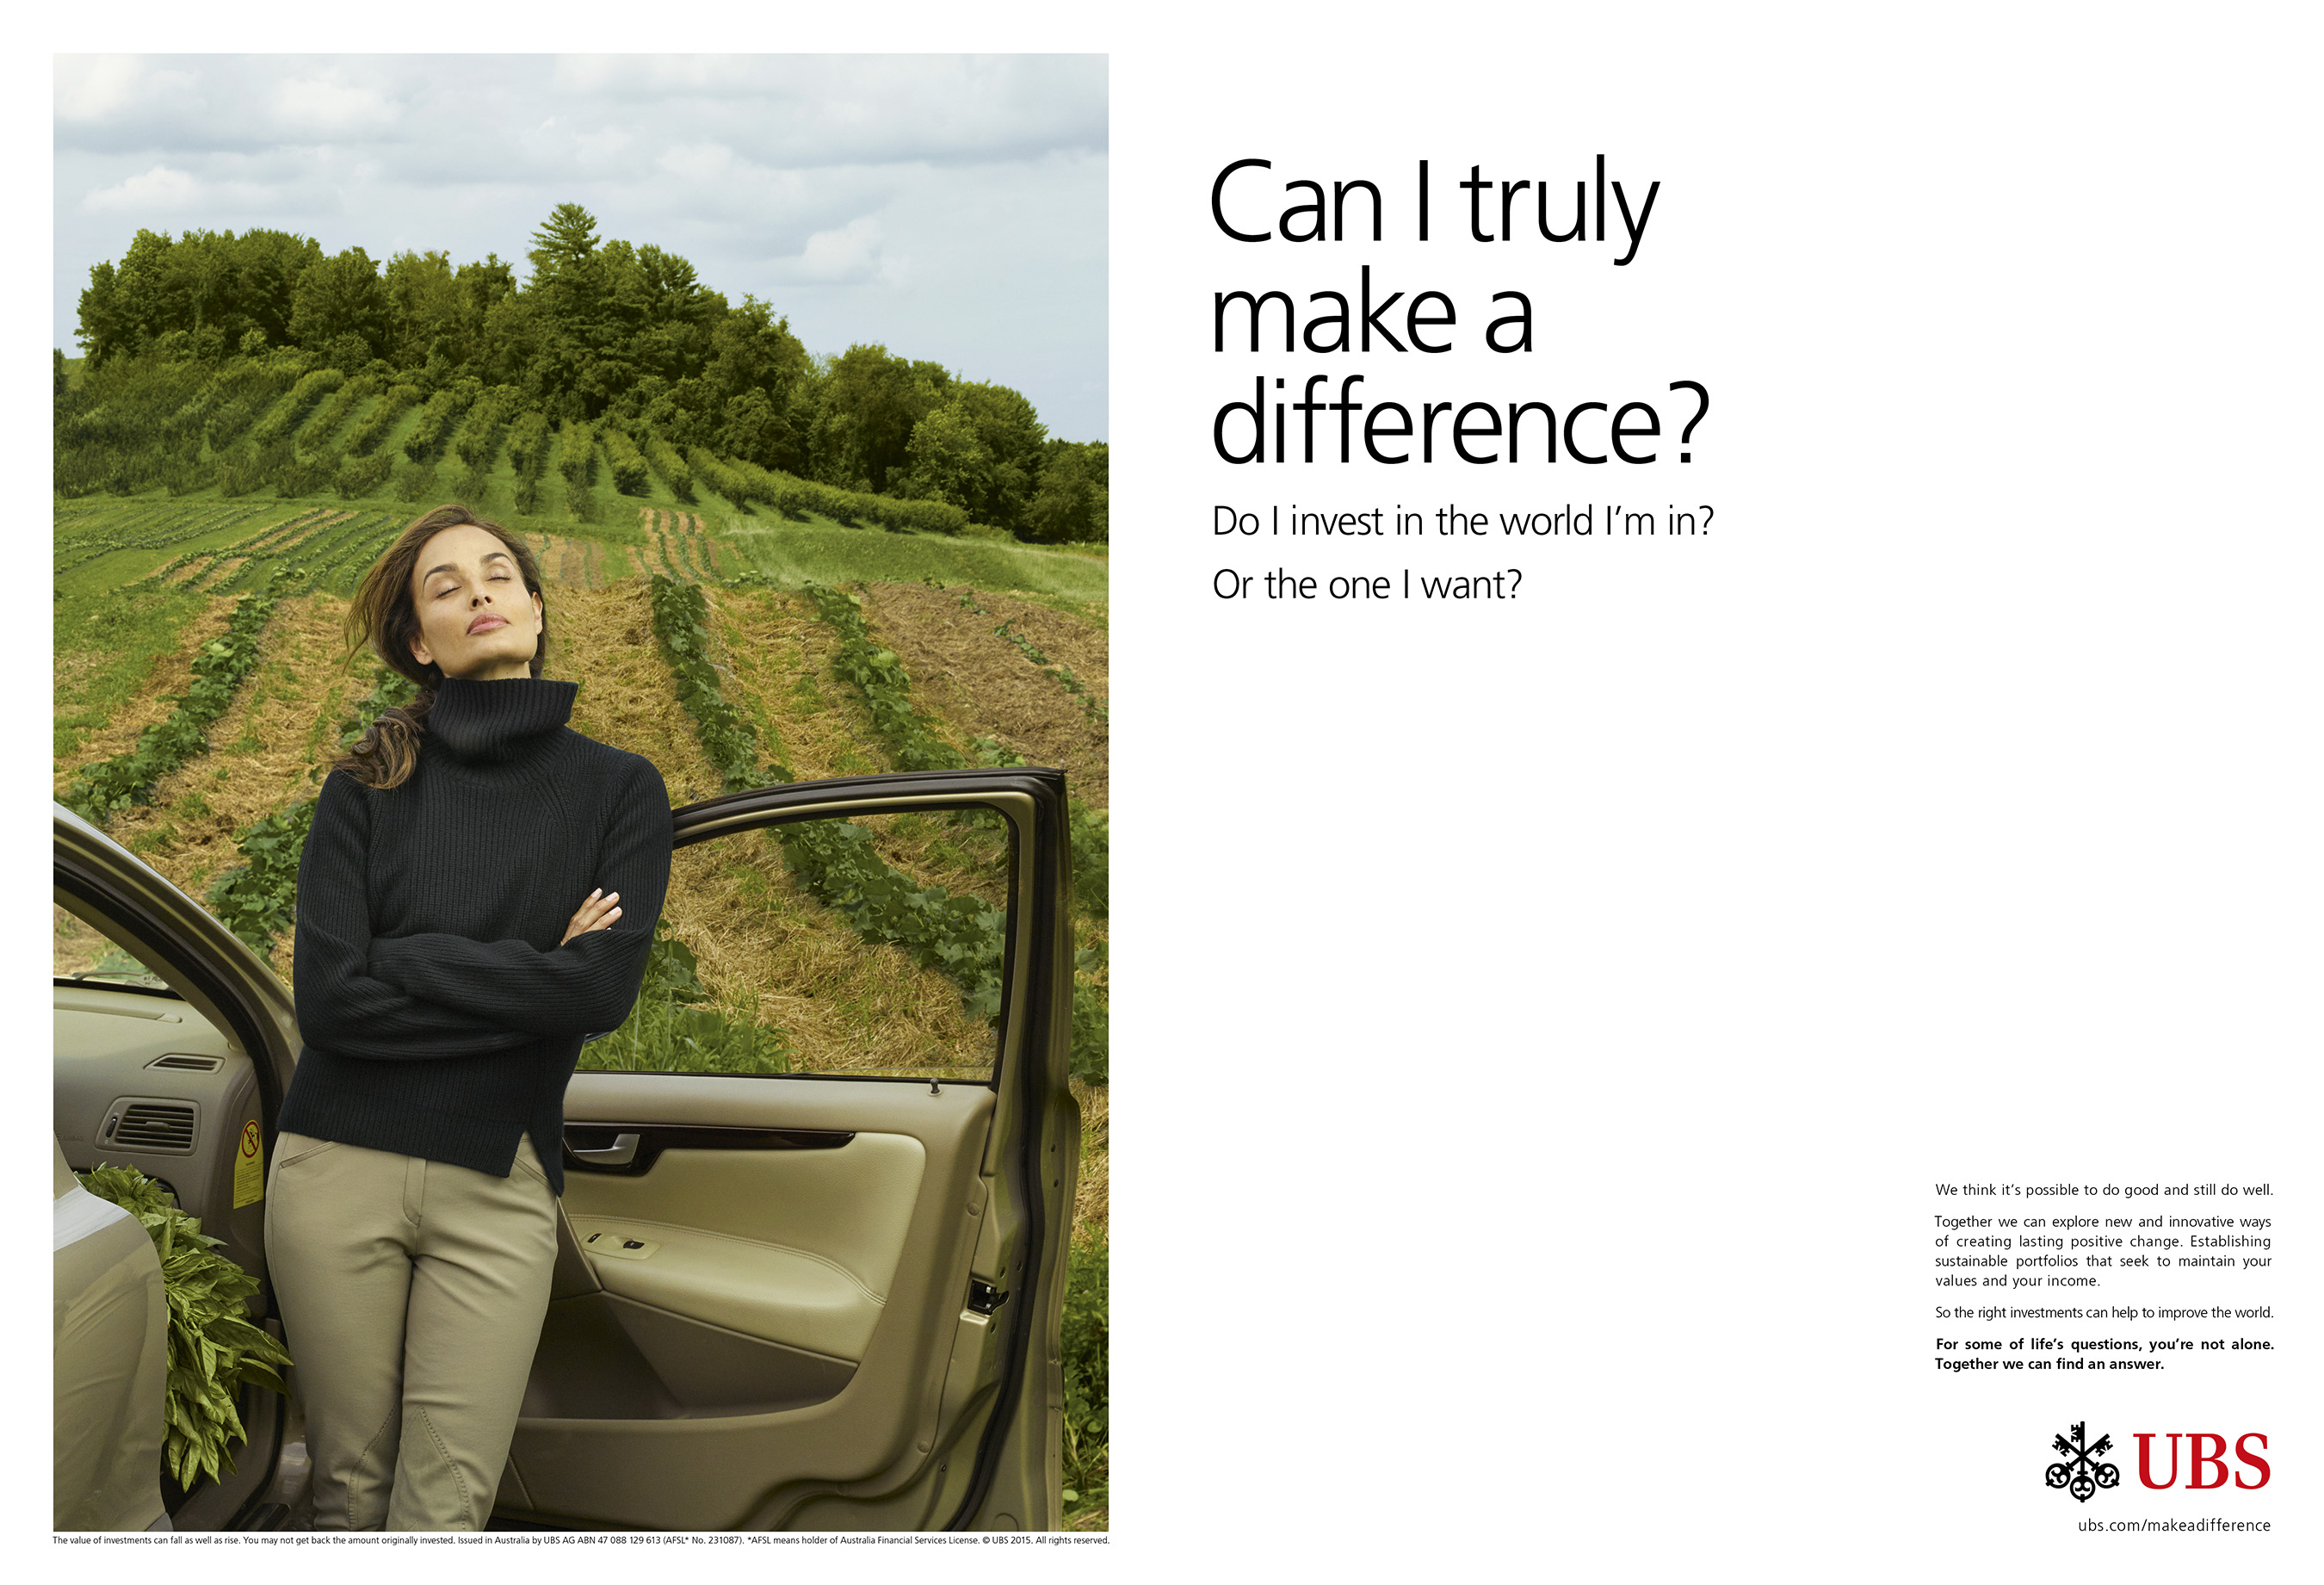 UBS launches global brand campaign